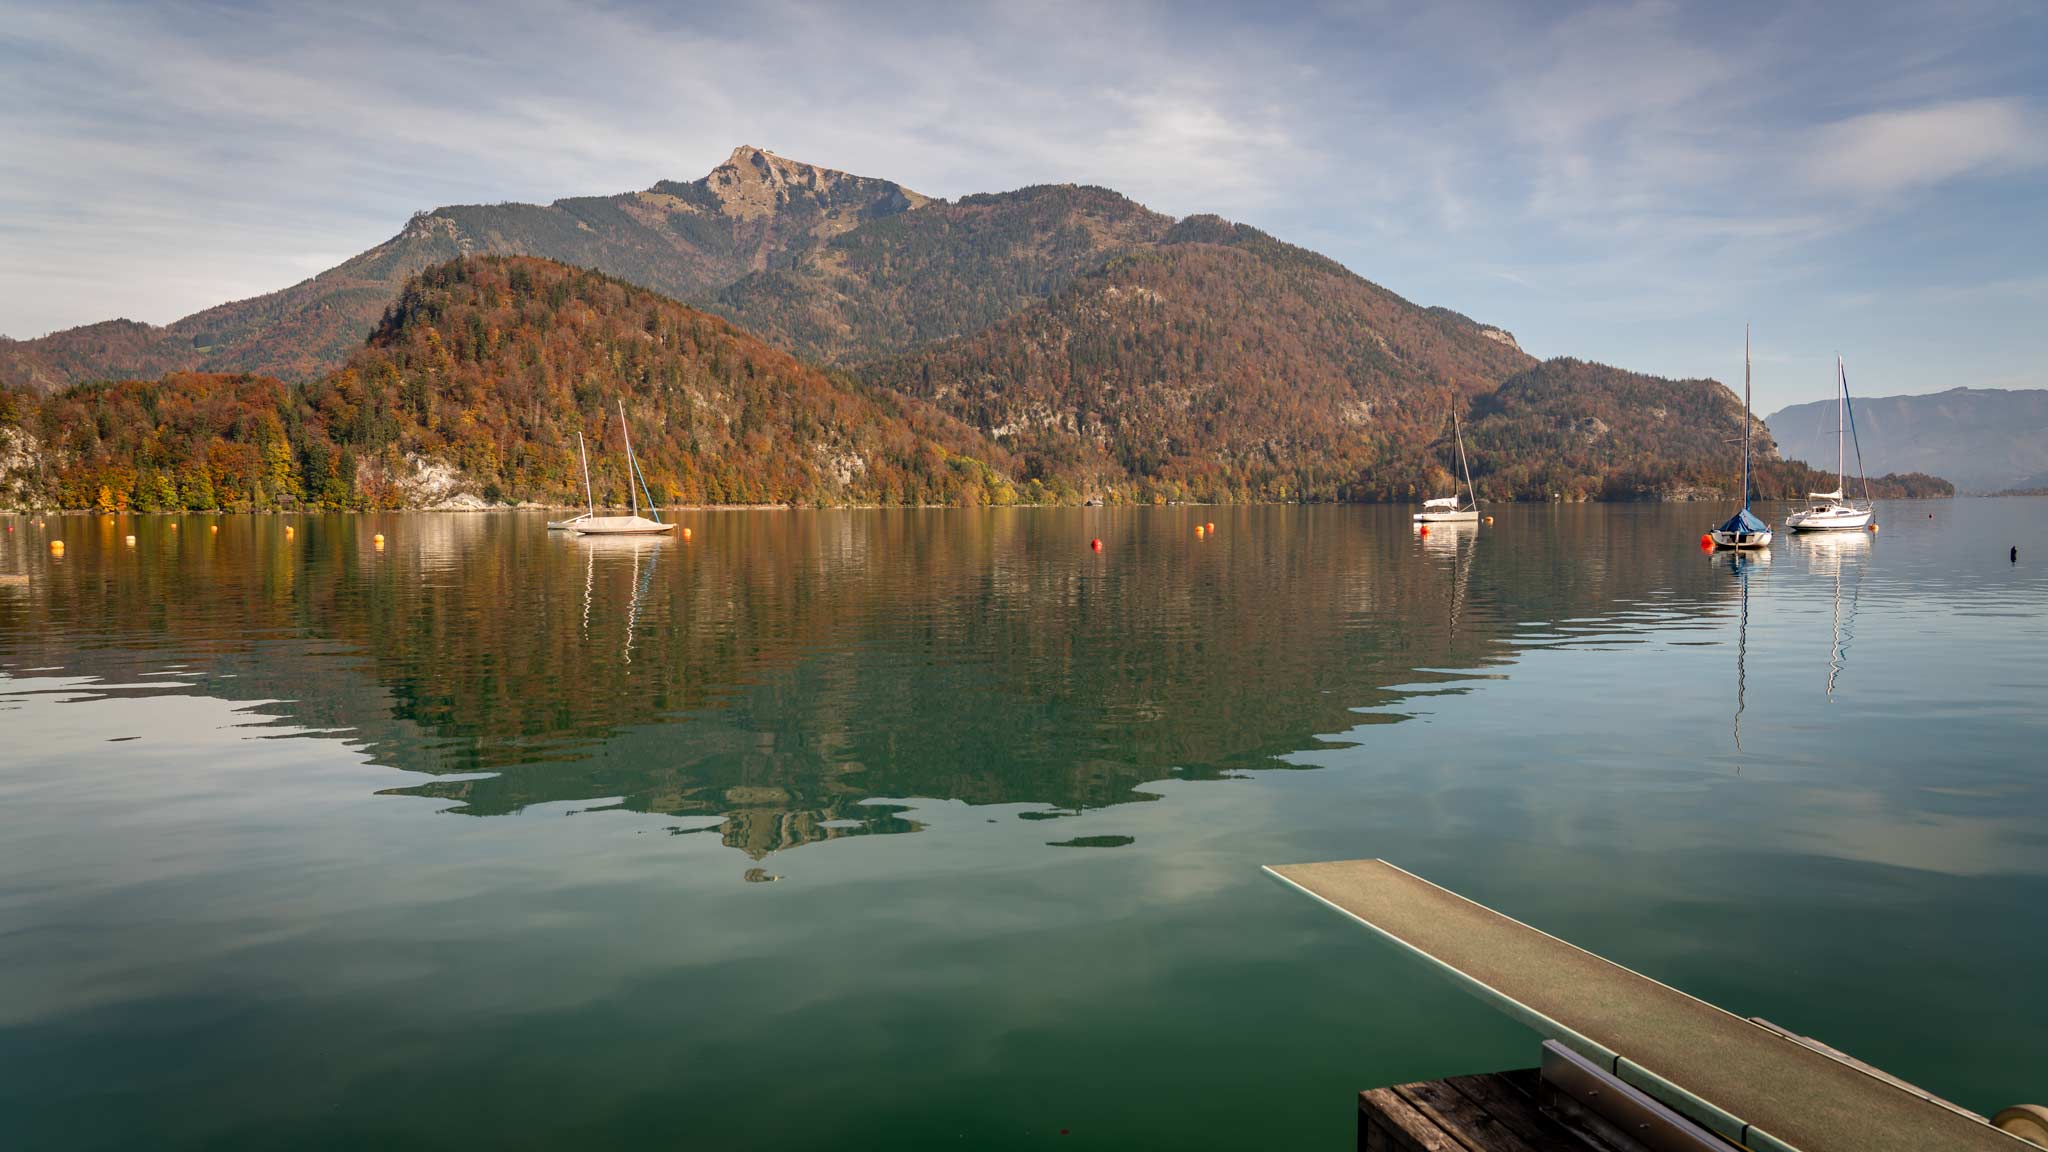 Even at the start of Autumn, Salzburgerland's lakes are still tempting